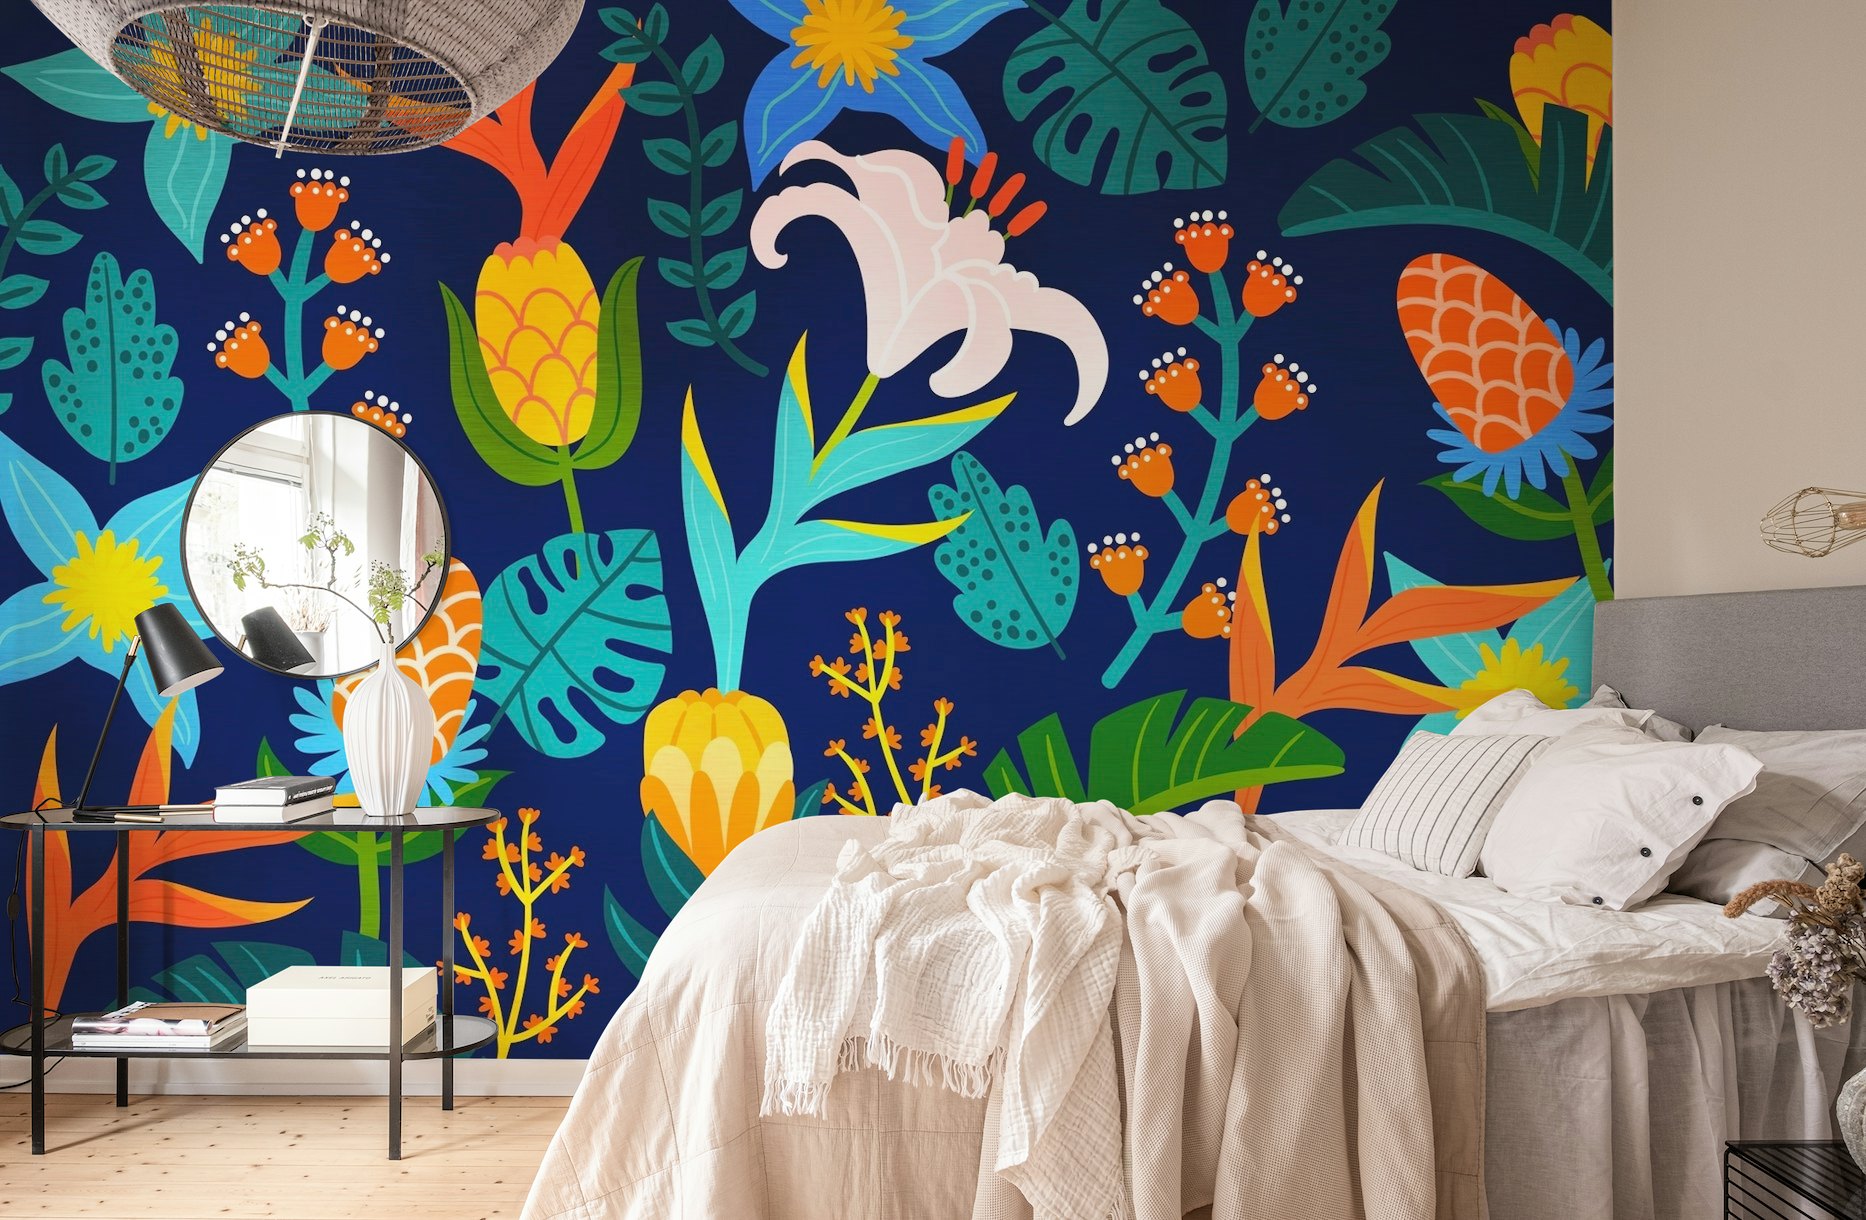 Artistic Frida Kahlo themed wallpaper from Happywall